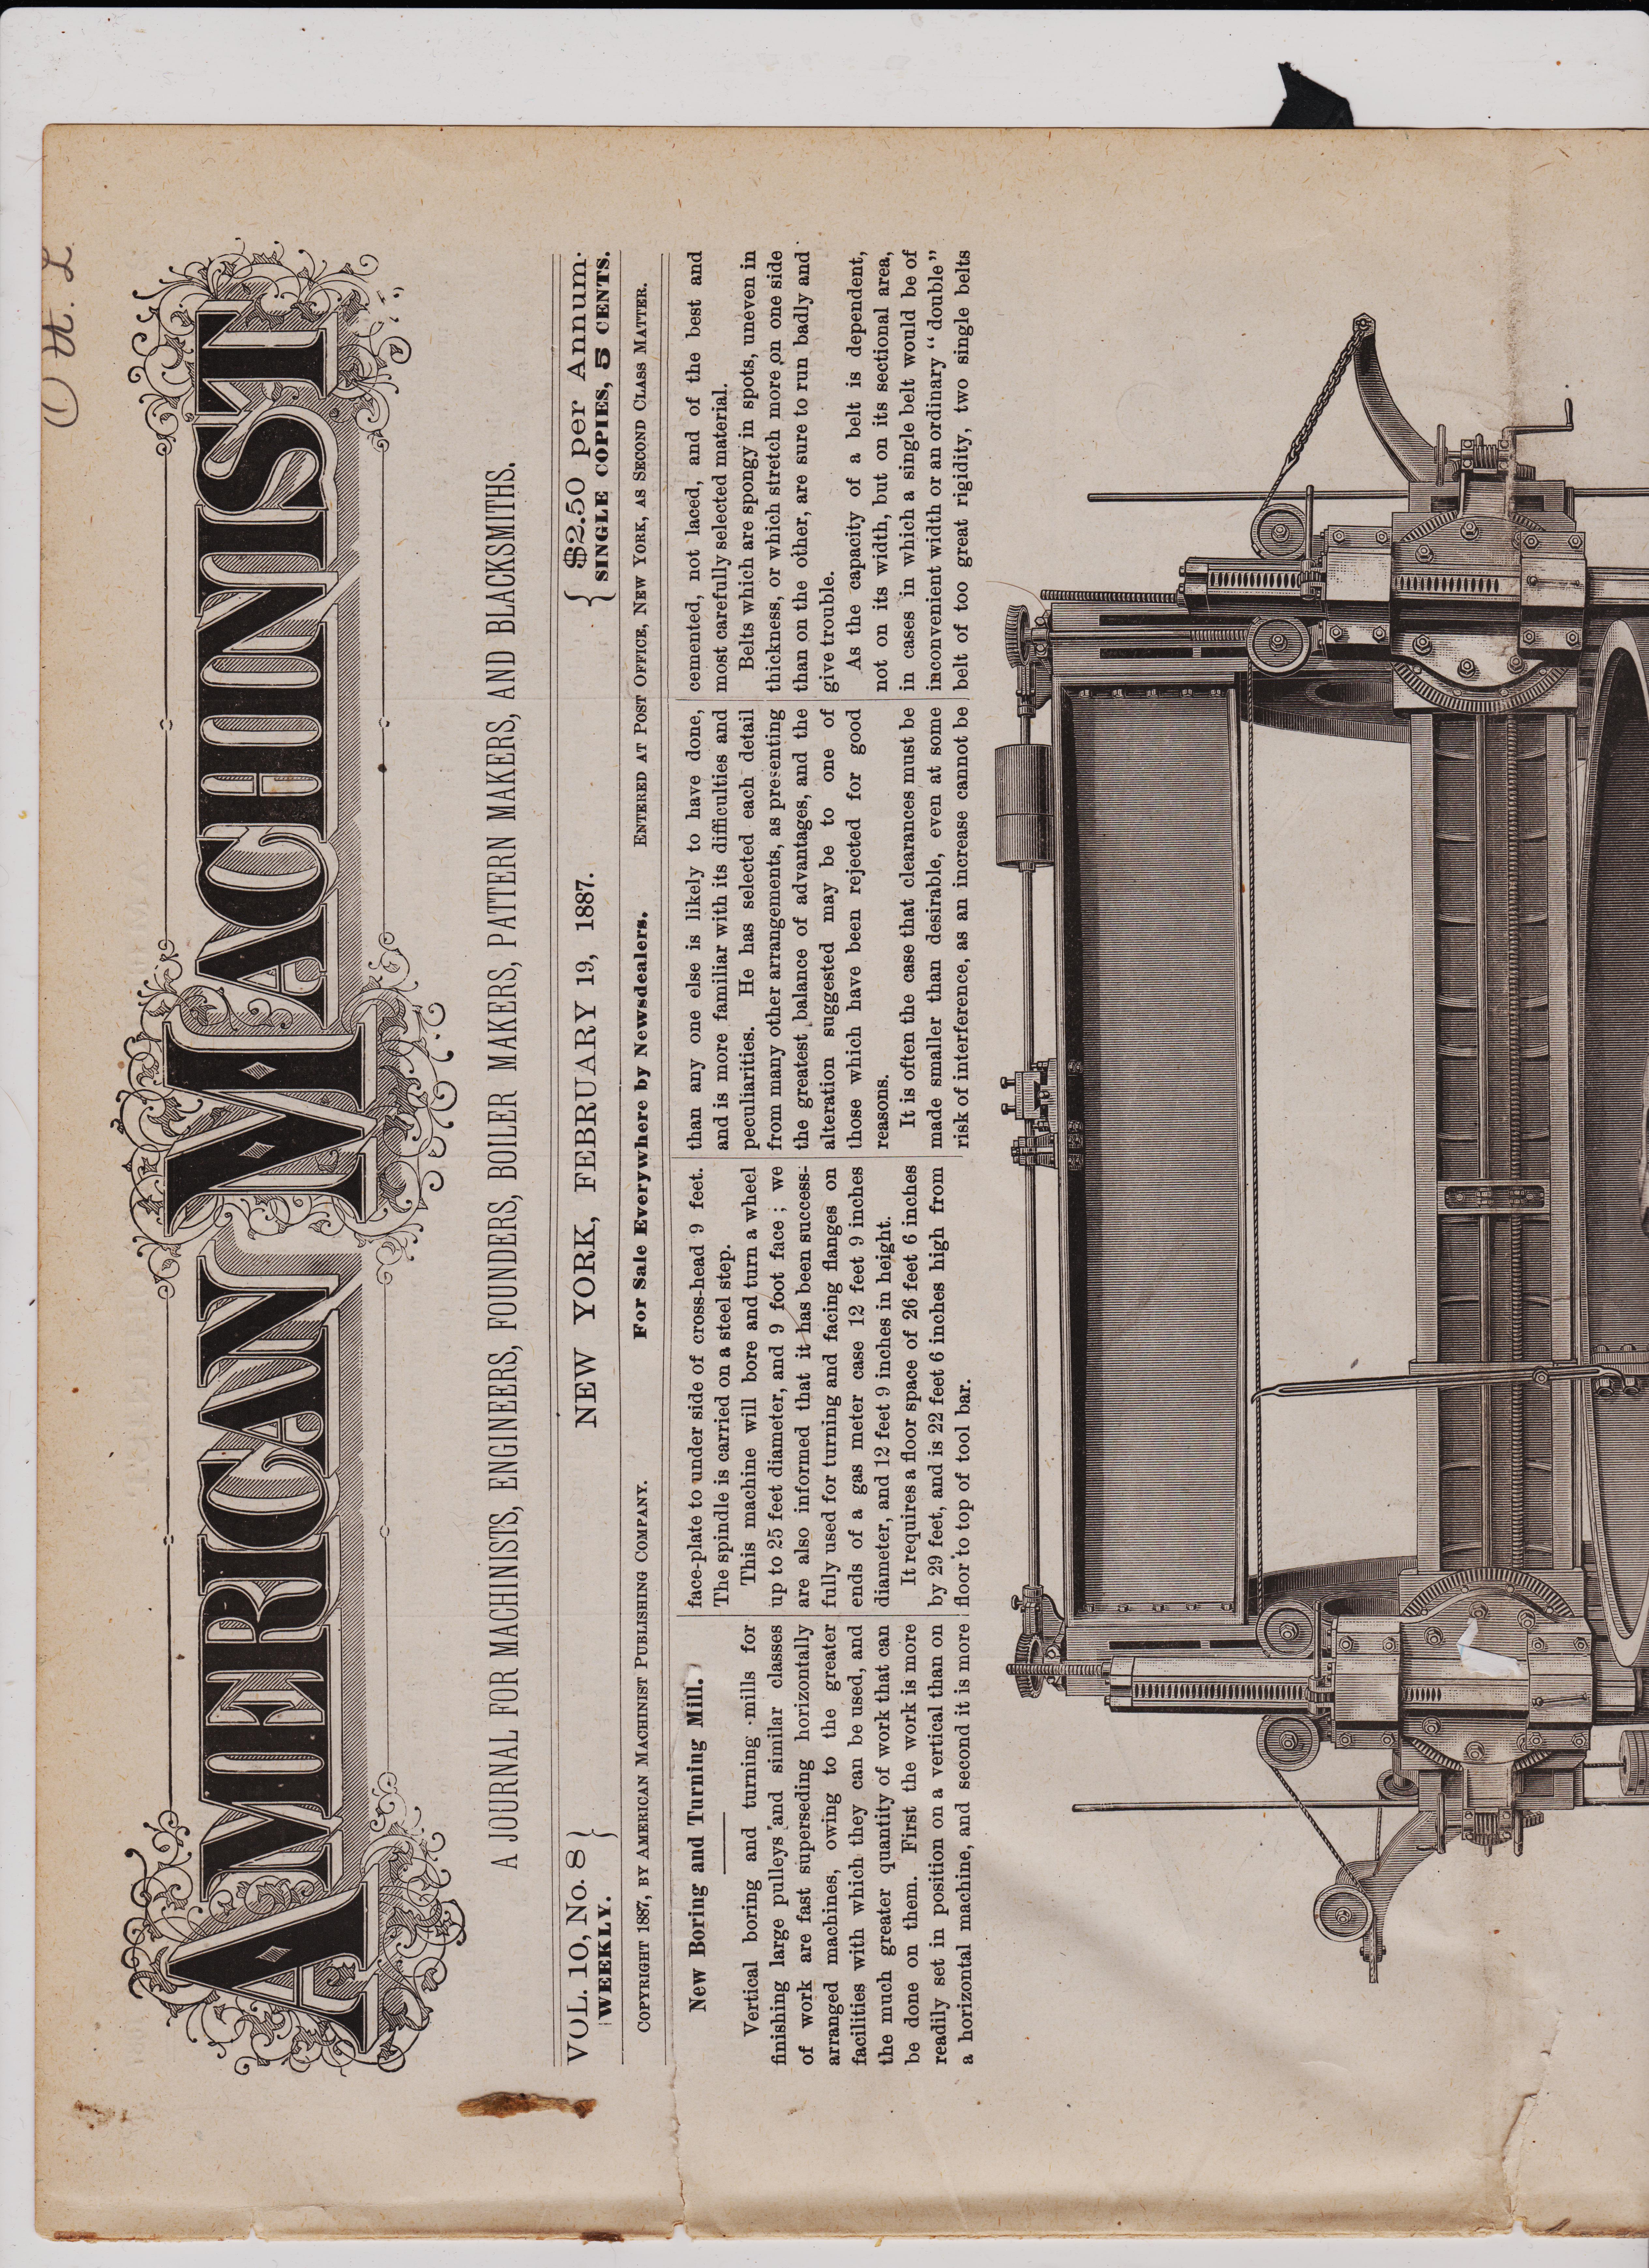 https://antiquemachinery.com/images-American-Machinist-Feb-19-1887/American-Machinist-Feb-19-1887-pg-1-top-New-Boring-and-Turning-Mill-Lathe-VTL-Suggestions-in-Machne-Design.jpeg